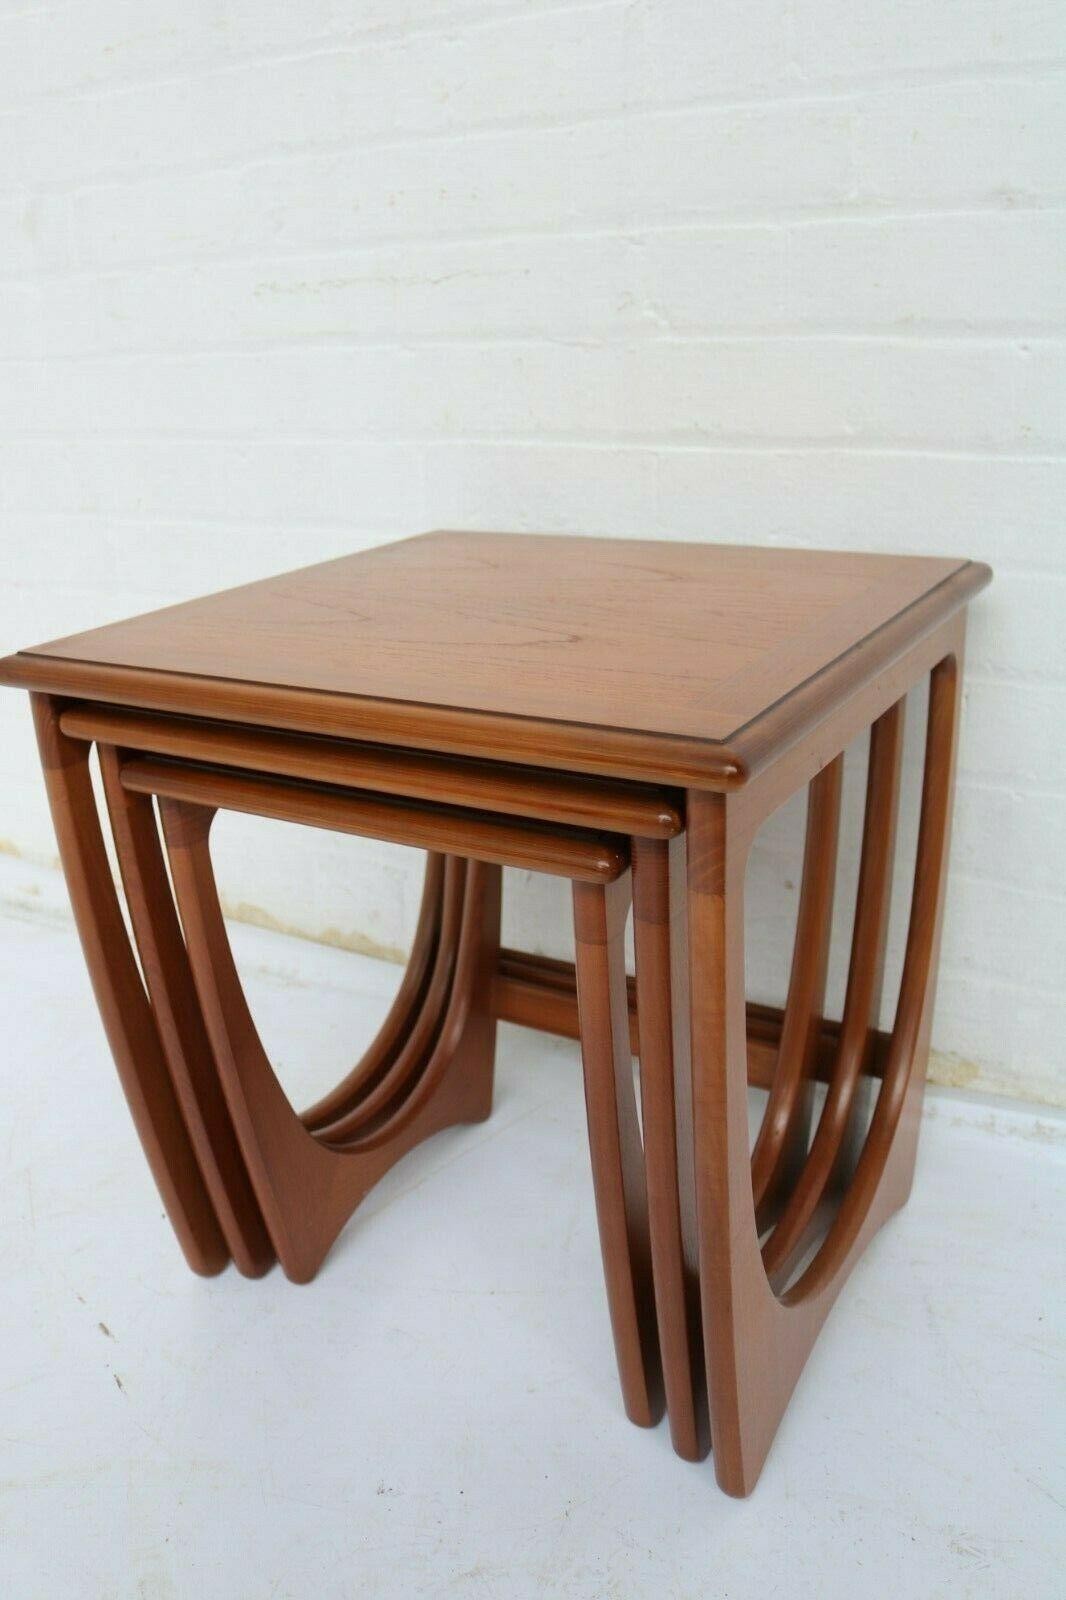 English Mid-Century Set of 3 Teak Nesting Tables Mod. Astro by Victor Wilkins for G Plan